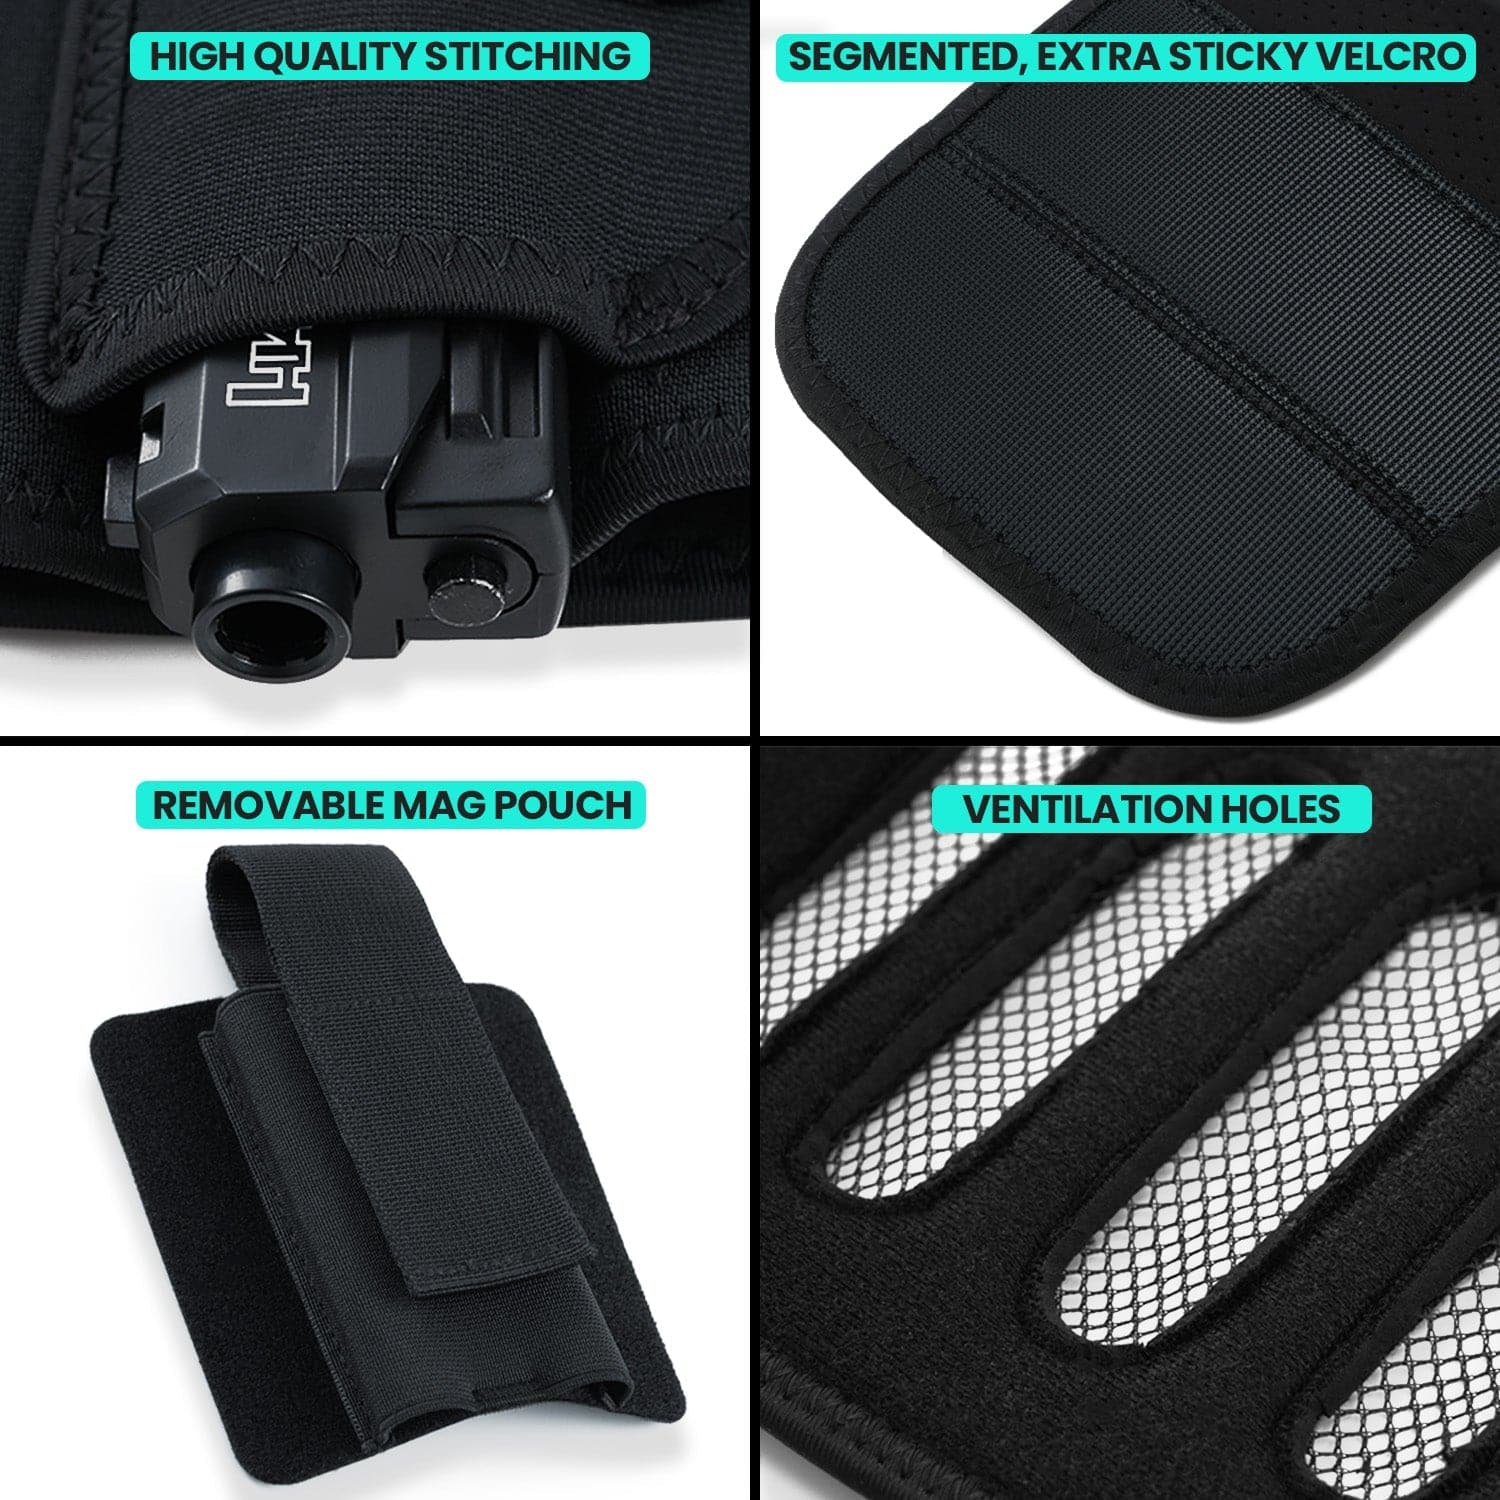 Ultimate Belly Band Holster for Concealed Carry - LPVPRODUCTS